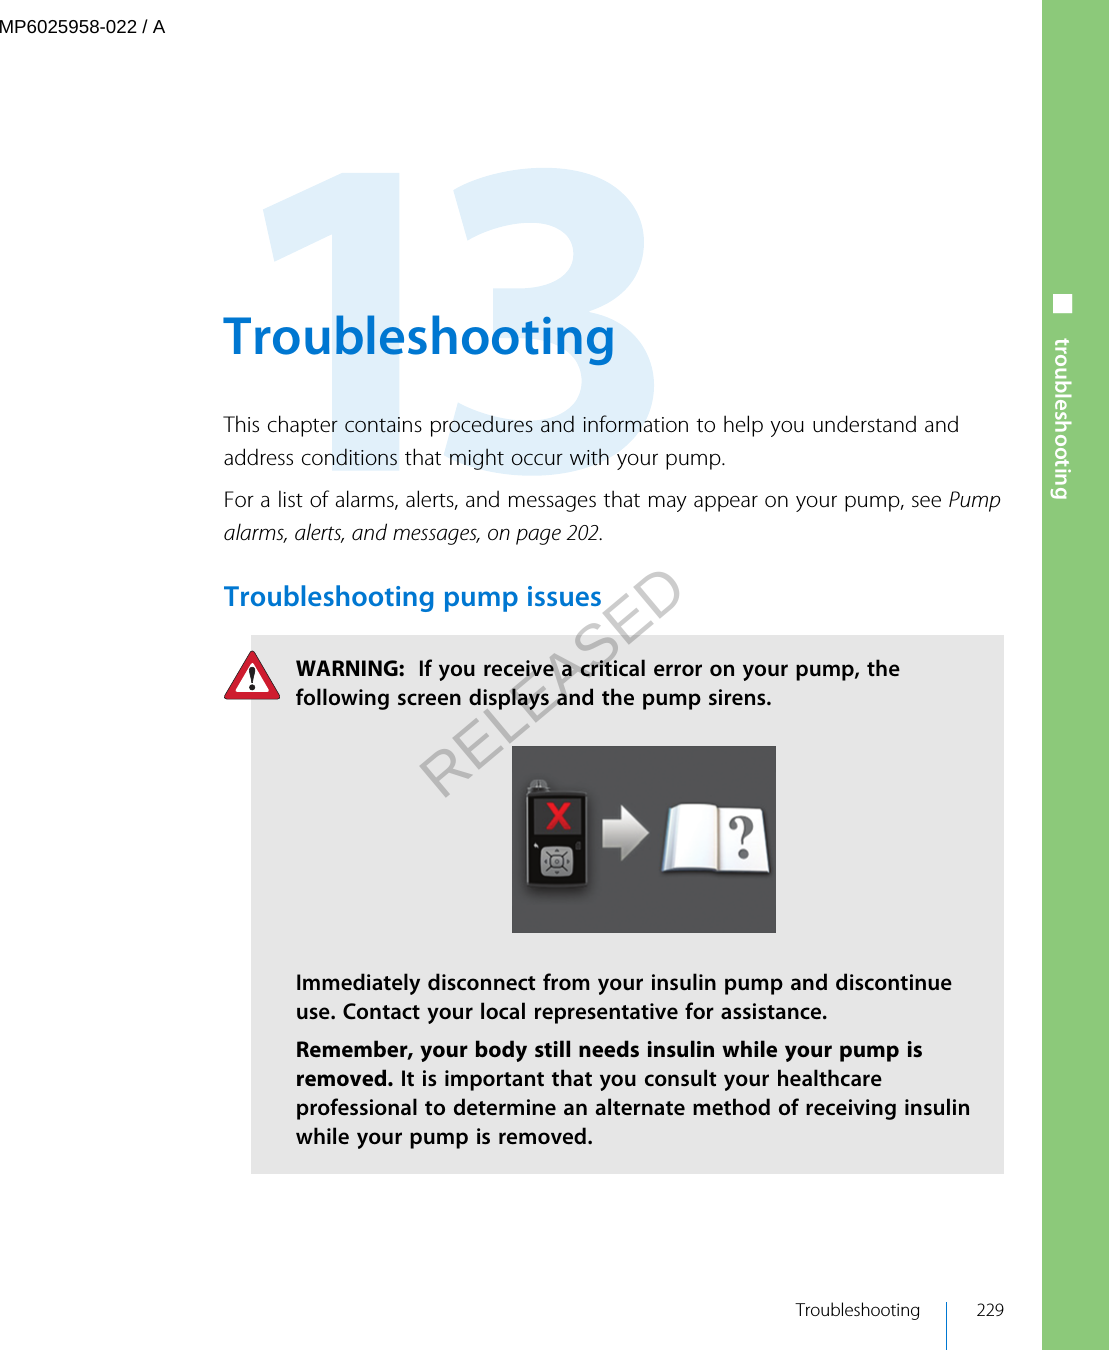  TroubleshootingThis chapter contains procedures and information to help you understand andaddress conditions that might occur with your pump.For a list of alarms, alerts, and messages that may appear on your pump, see Pumpalarms, alerts, and messages, on page 202.Troubleshooting pump issuesWARNING:  If you receive a critical error on your pump, thefollowing screen displays and the pump sirens.Immediately disconnect from your insulin pump and discontinueuse. Contact your local representative for assistance.Remember, your body still needs insulin while your pump isremoved. It is important that you consult your healthcareprofessional to determine an alternate method of receiving insulinwhile your pump is removed. Troubleshooting 229■ troubleshootingMP6025958-022 / ARELEASED